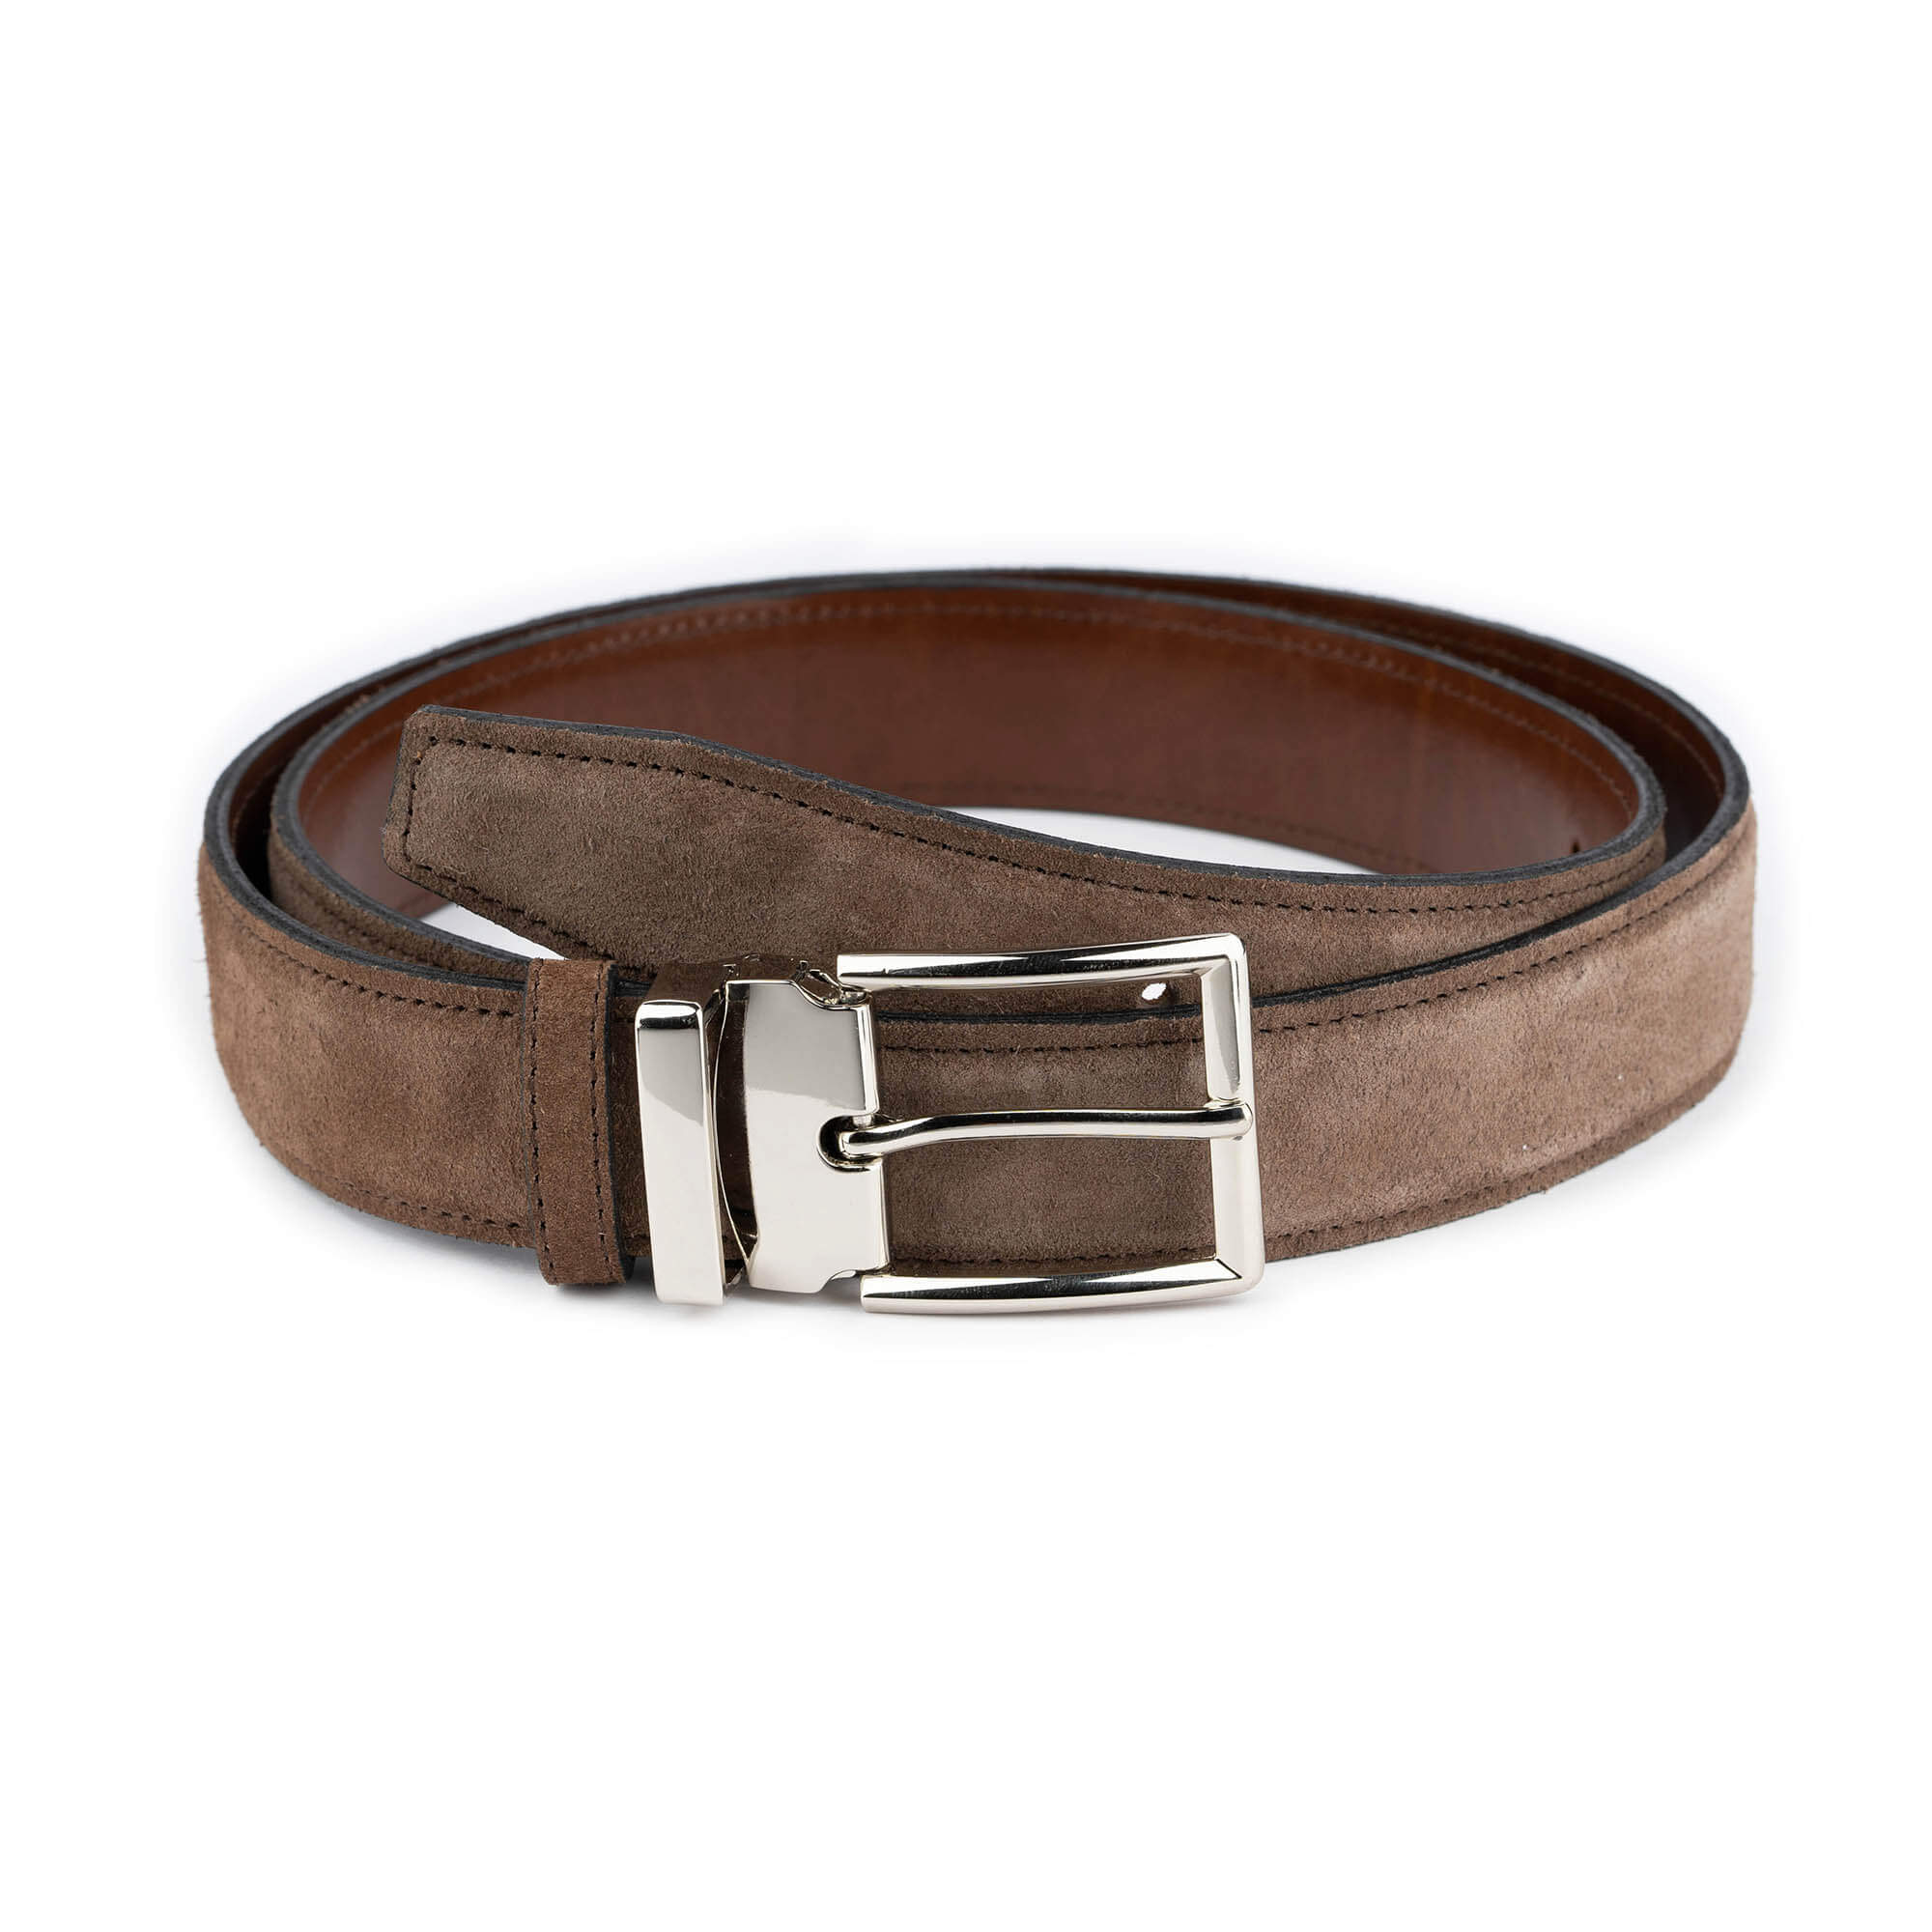 One Casual genuine Leather Mens Belt with Silver Buckle Waist shirts Gift #VB019 